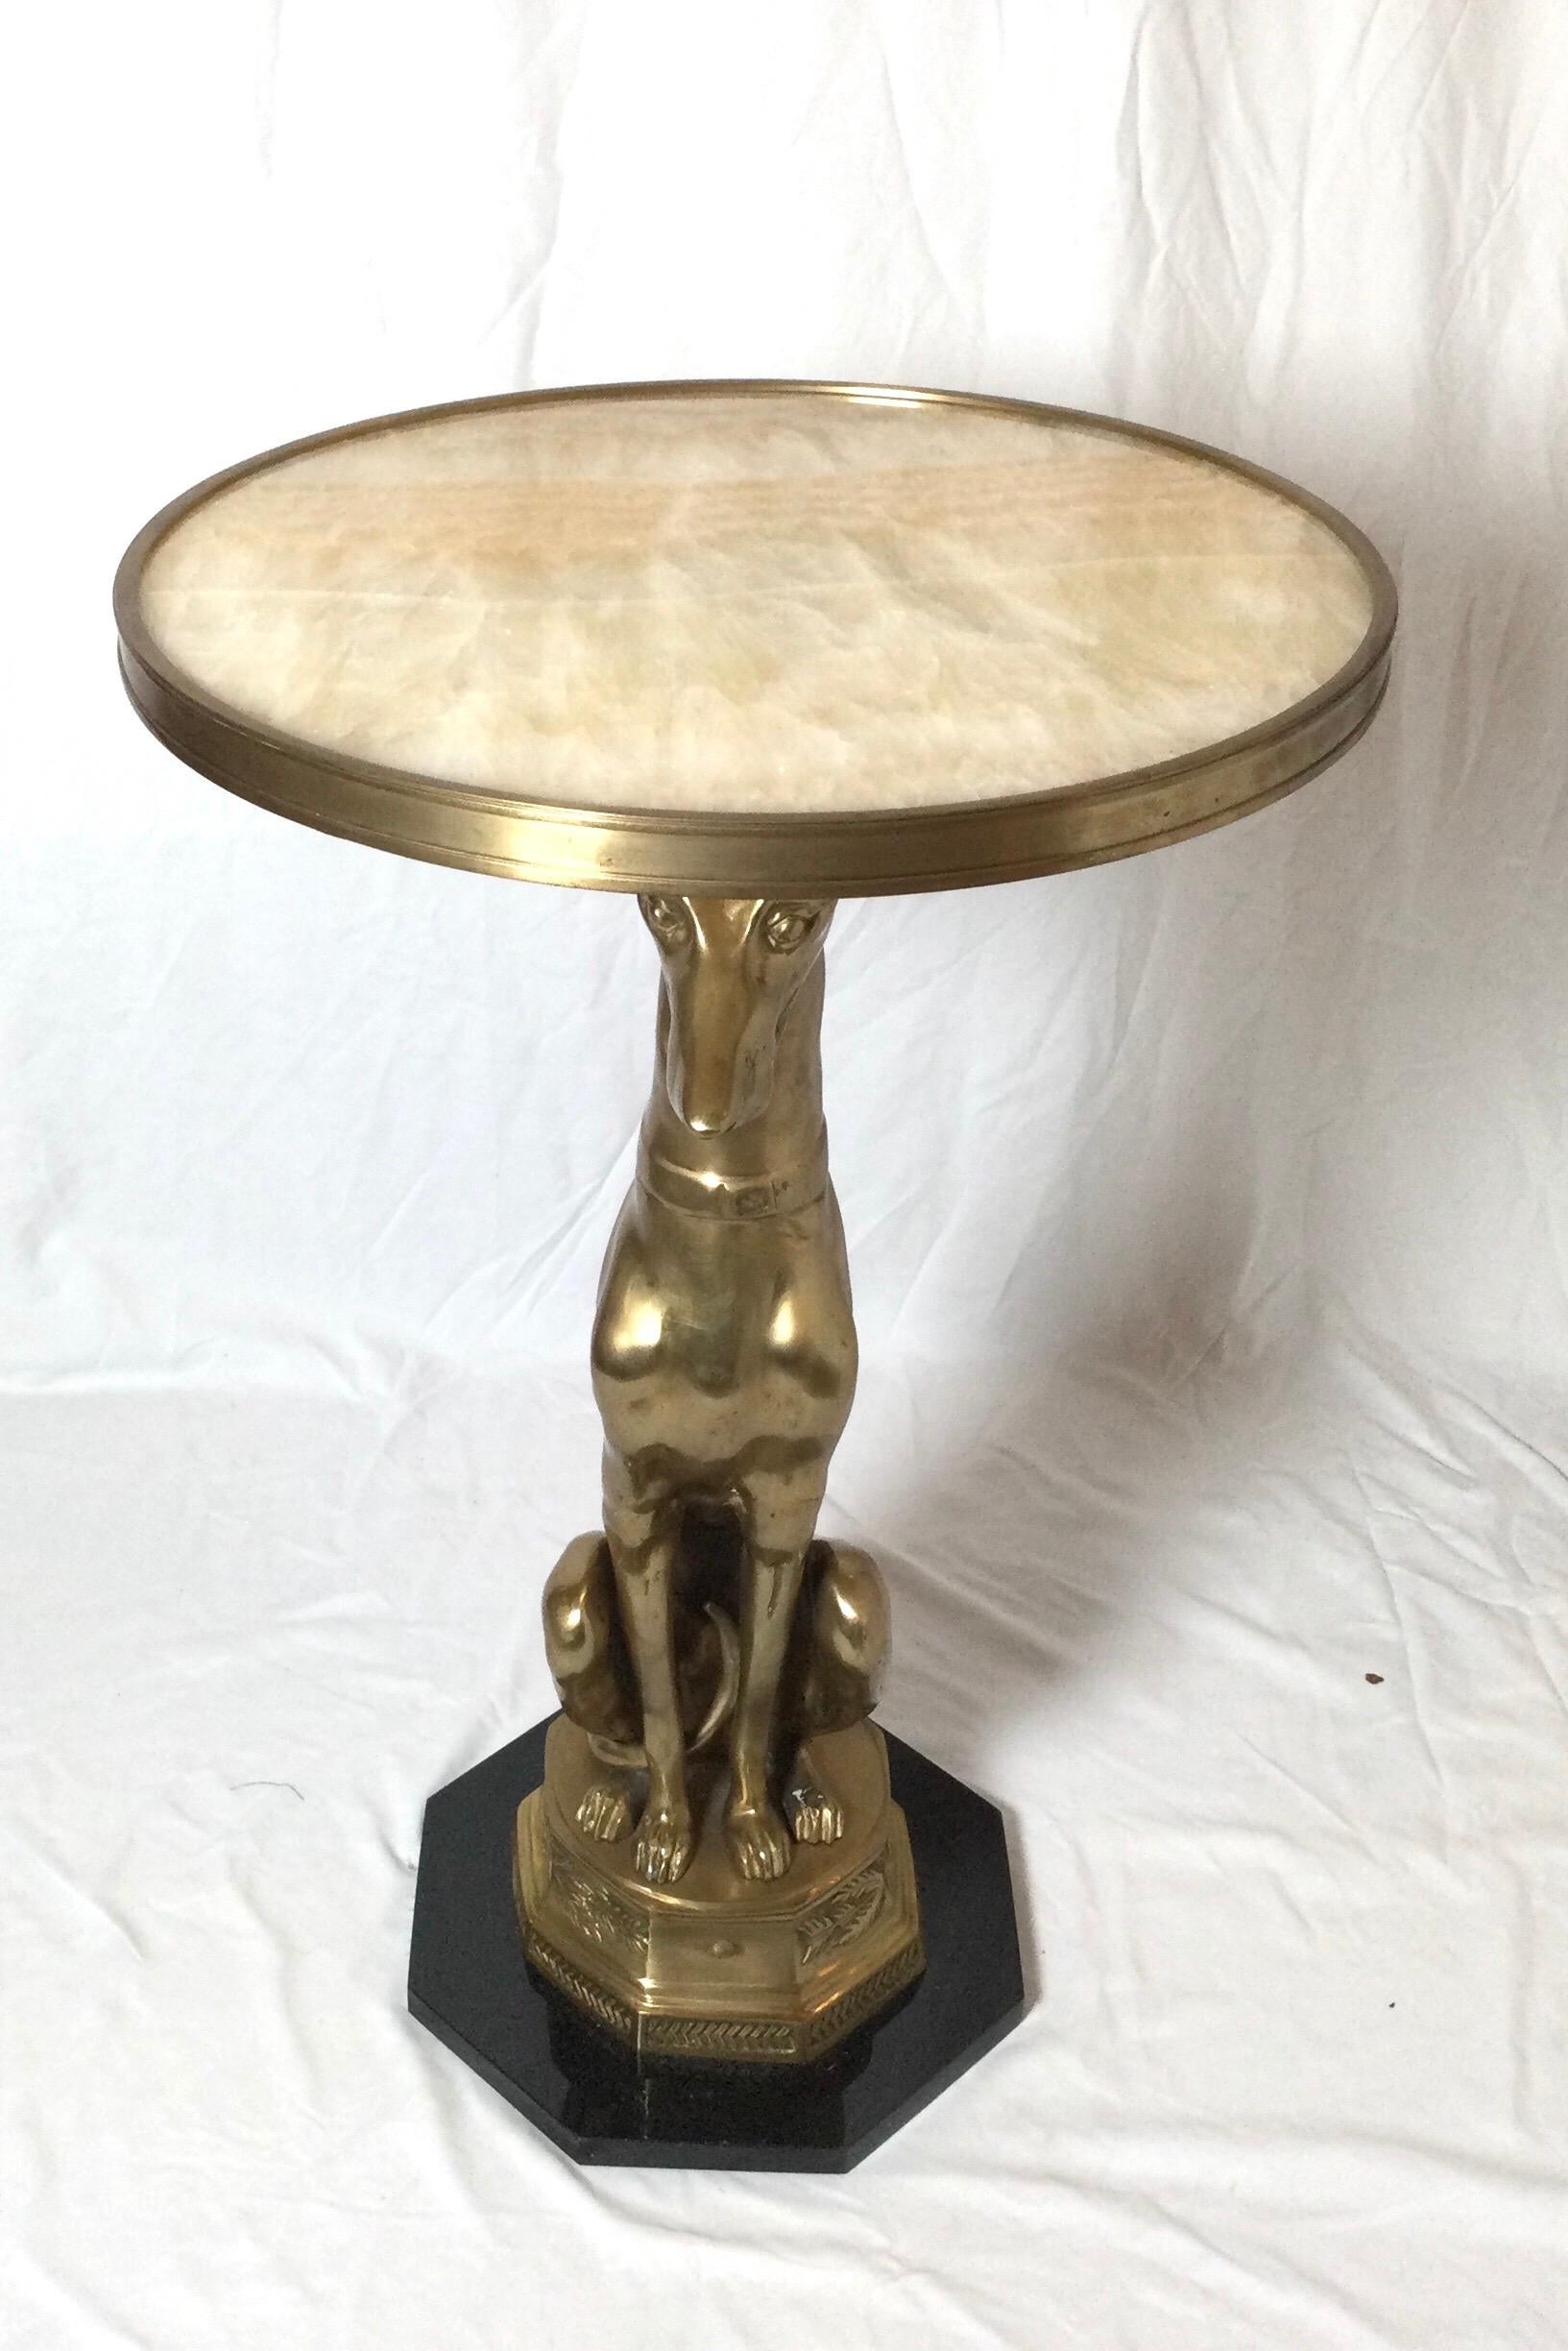 A cast brass whippet dog table with round onyx top and heagnal black base. The burnished surface with the sone top and base more polished. Measures: 30 inches tall, 17 inches Diameter.